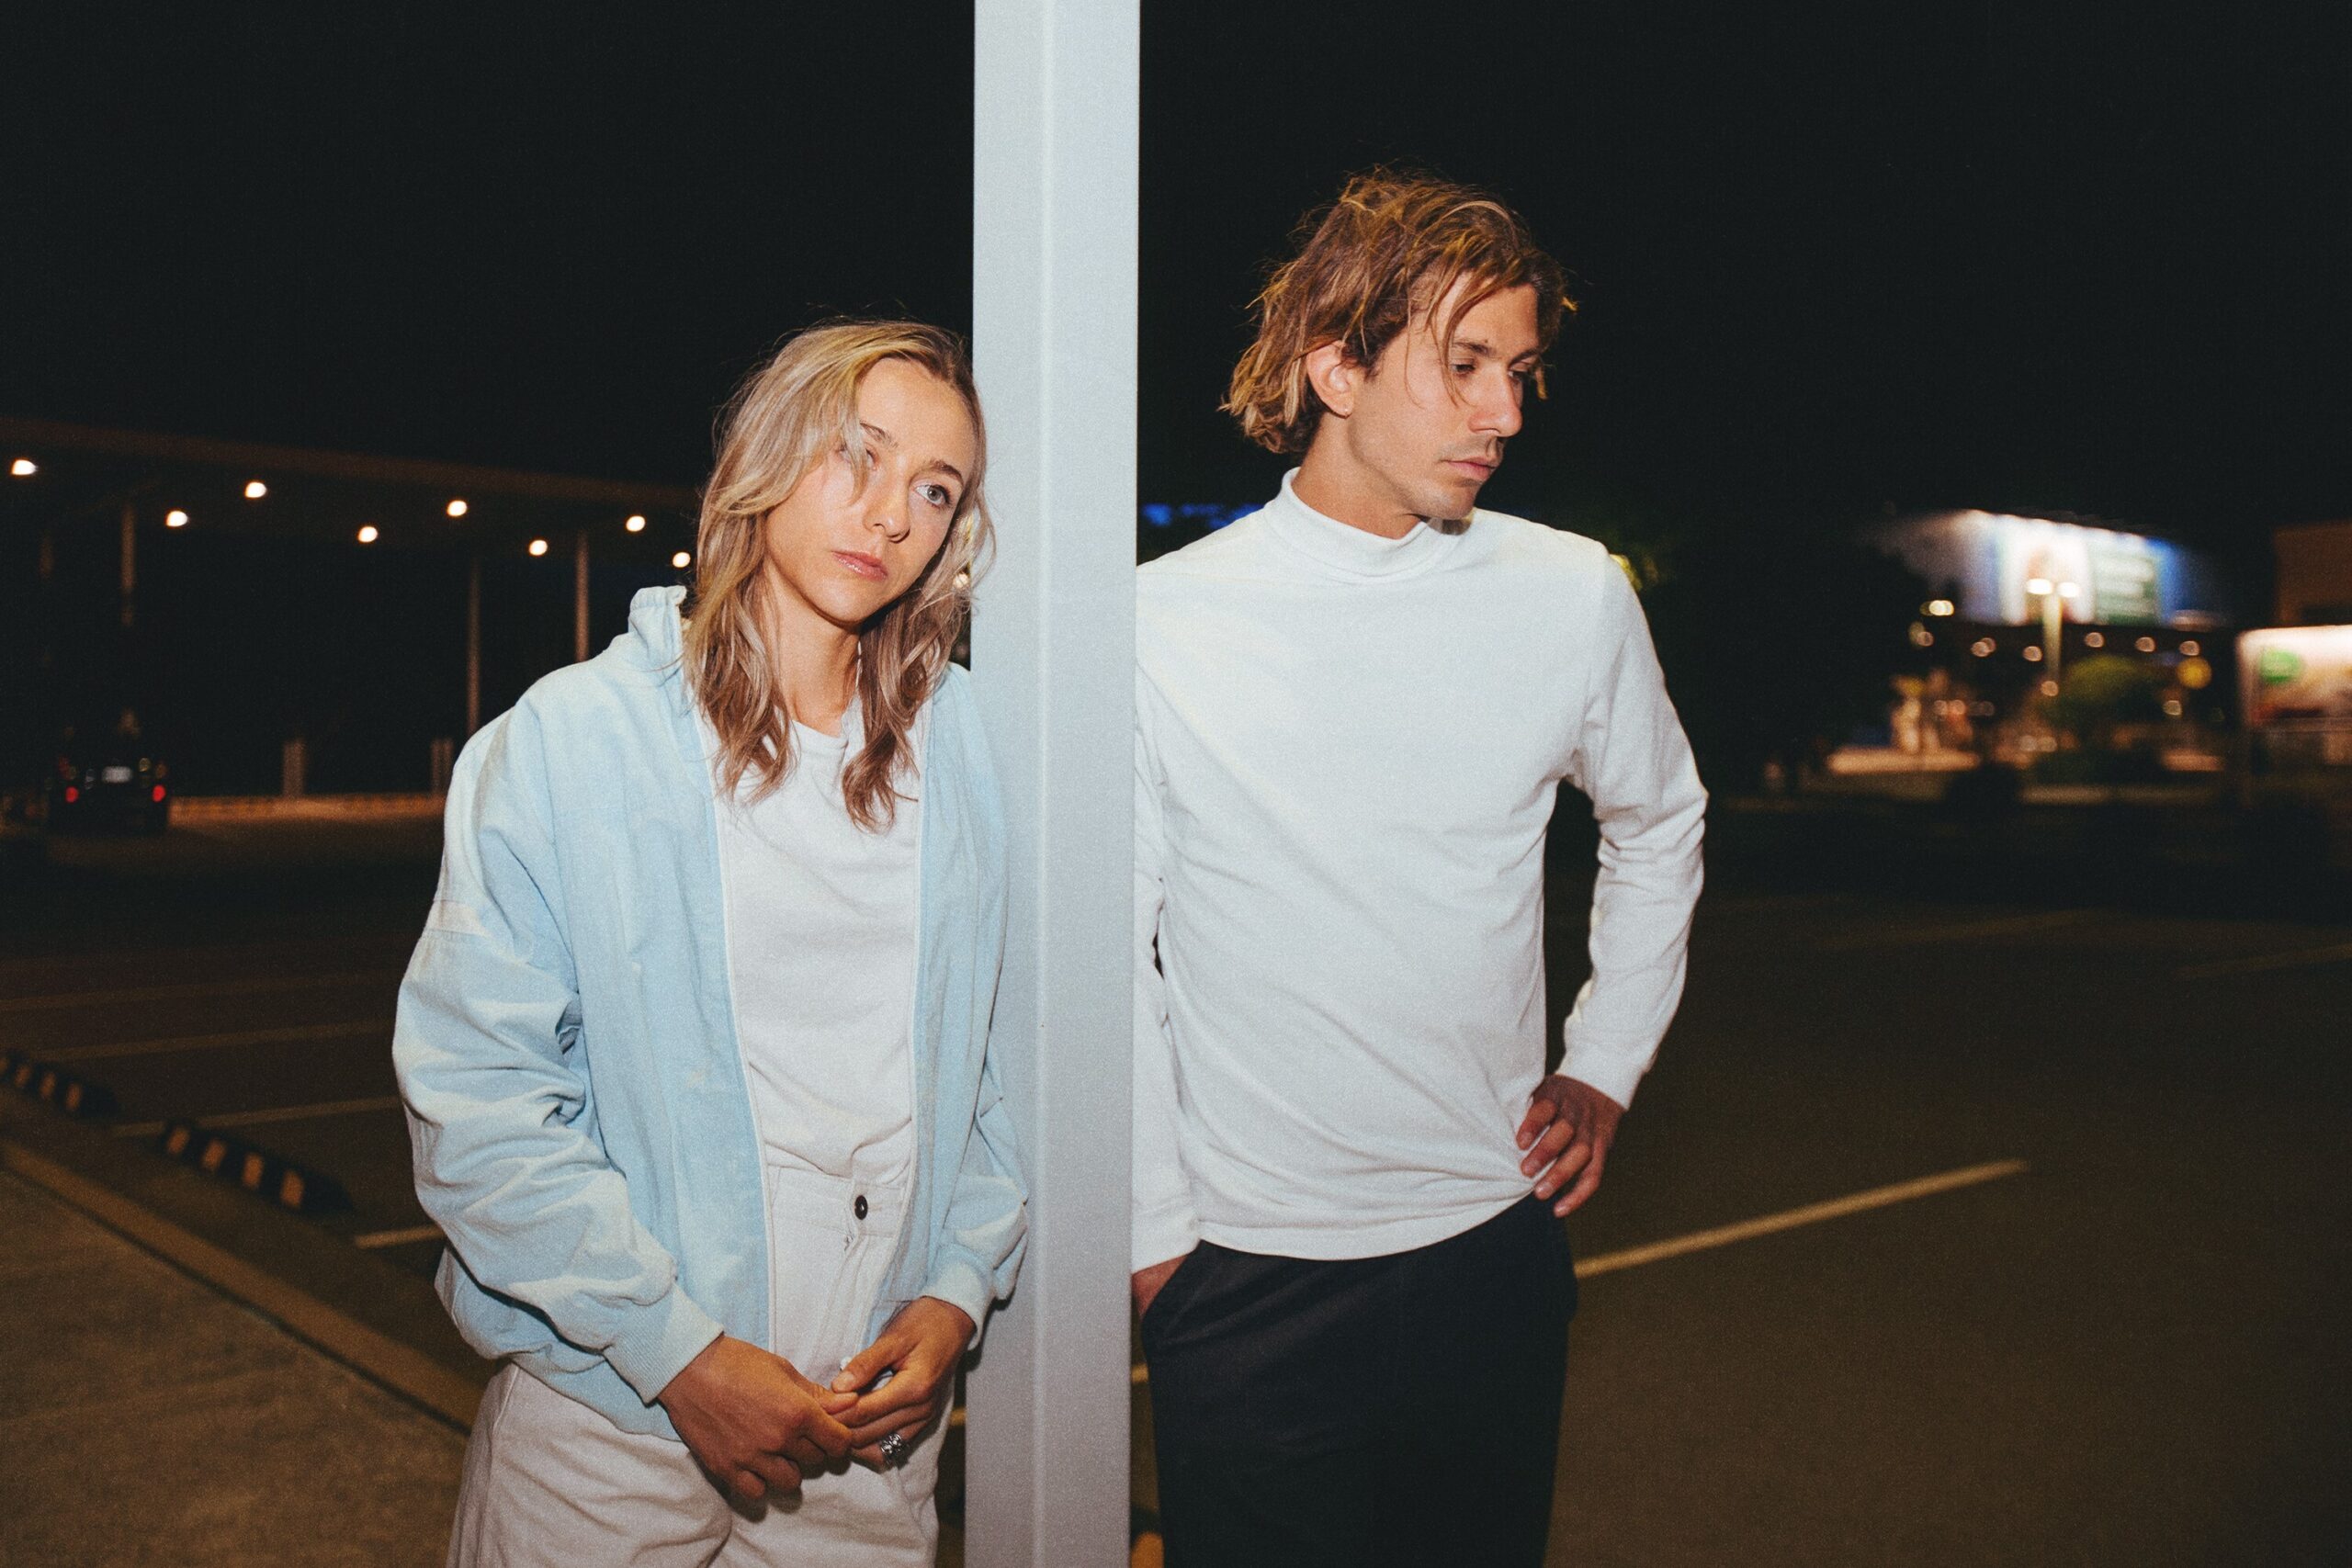 MICRA RELEASE DEBUT EP ‘SUNDAY’ + PLAYING SHOWS IN SYDNEY & MELBOURNE